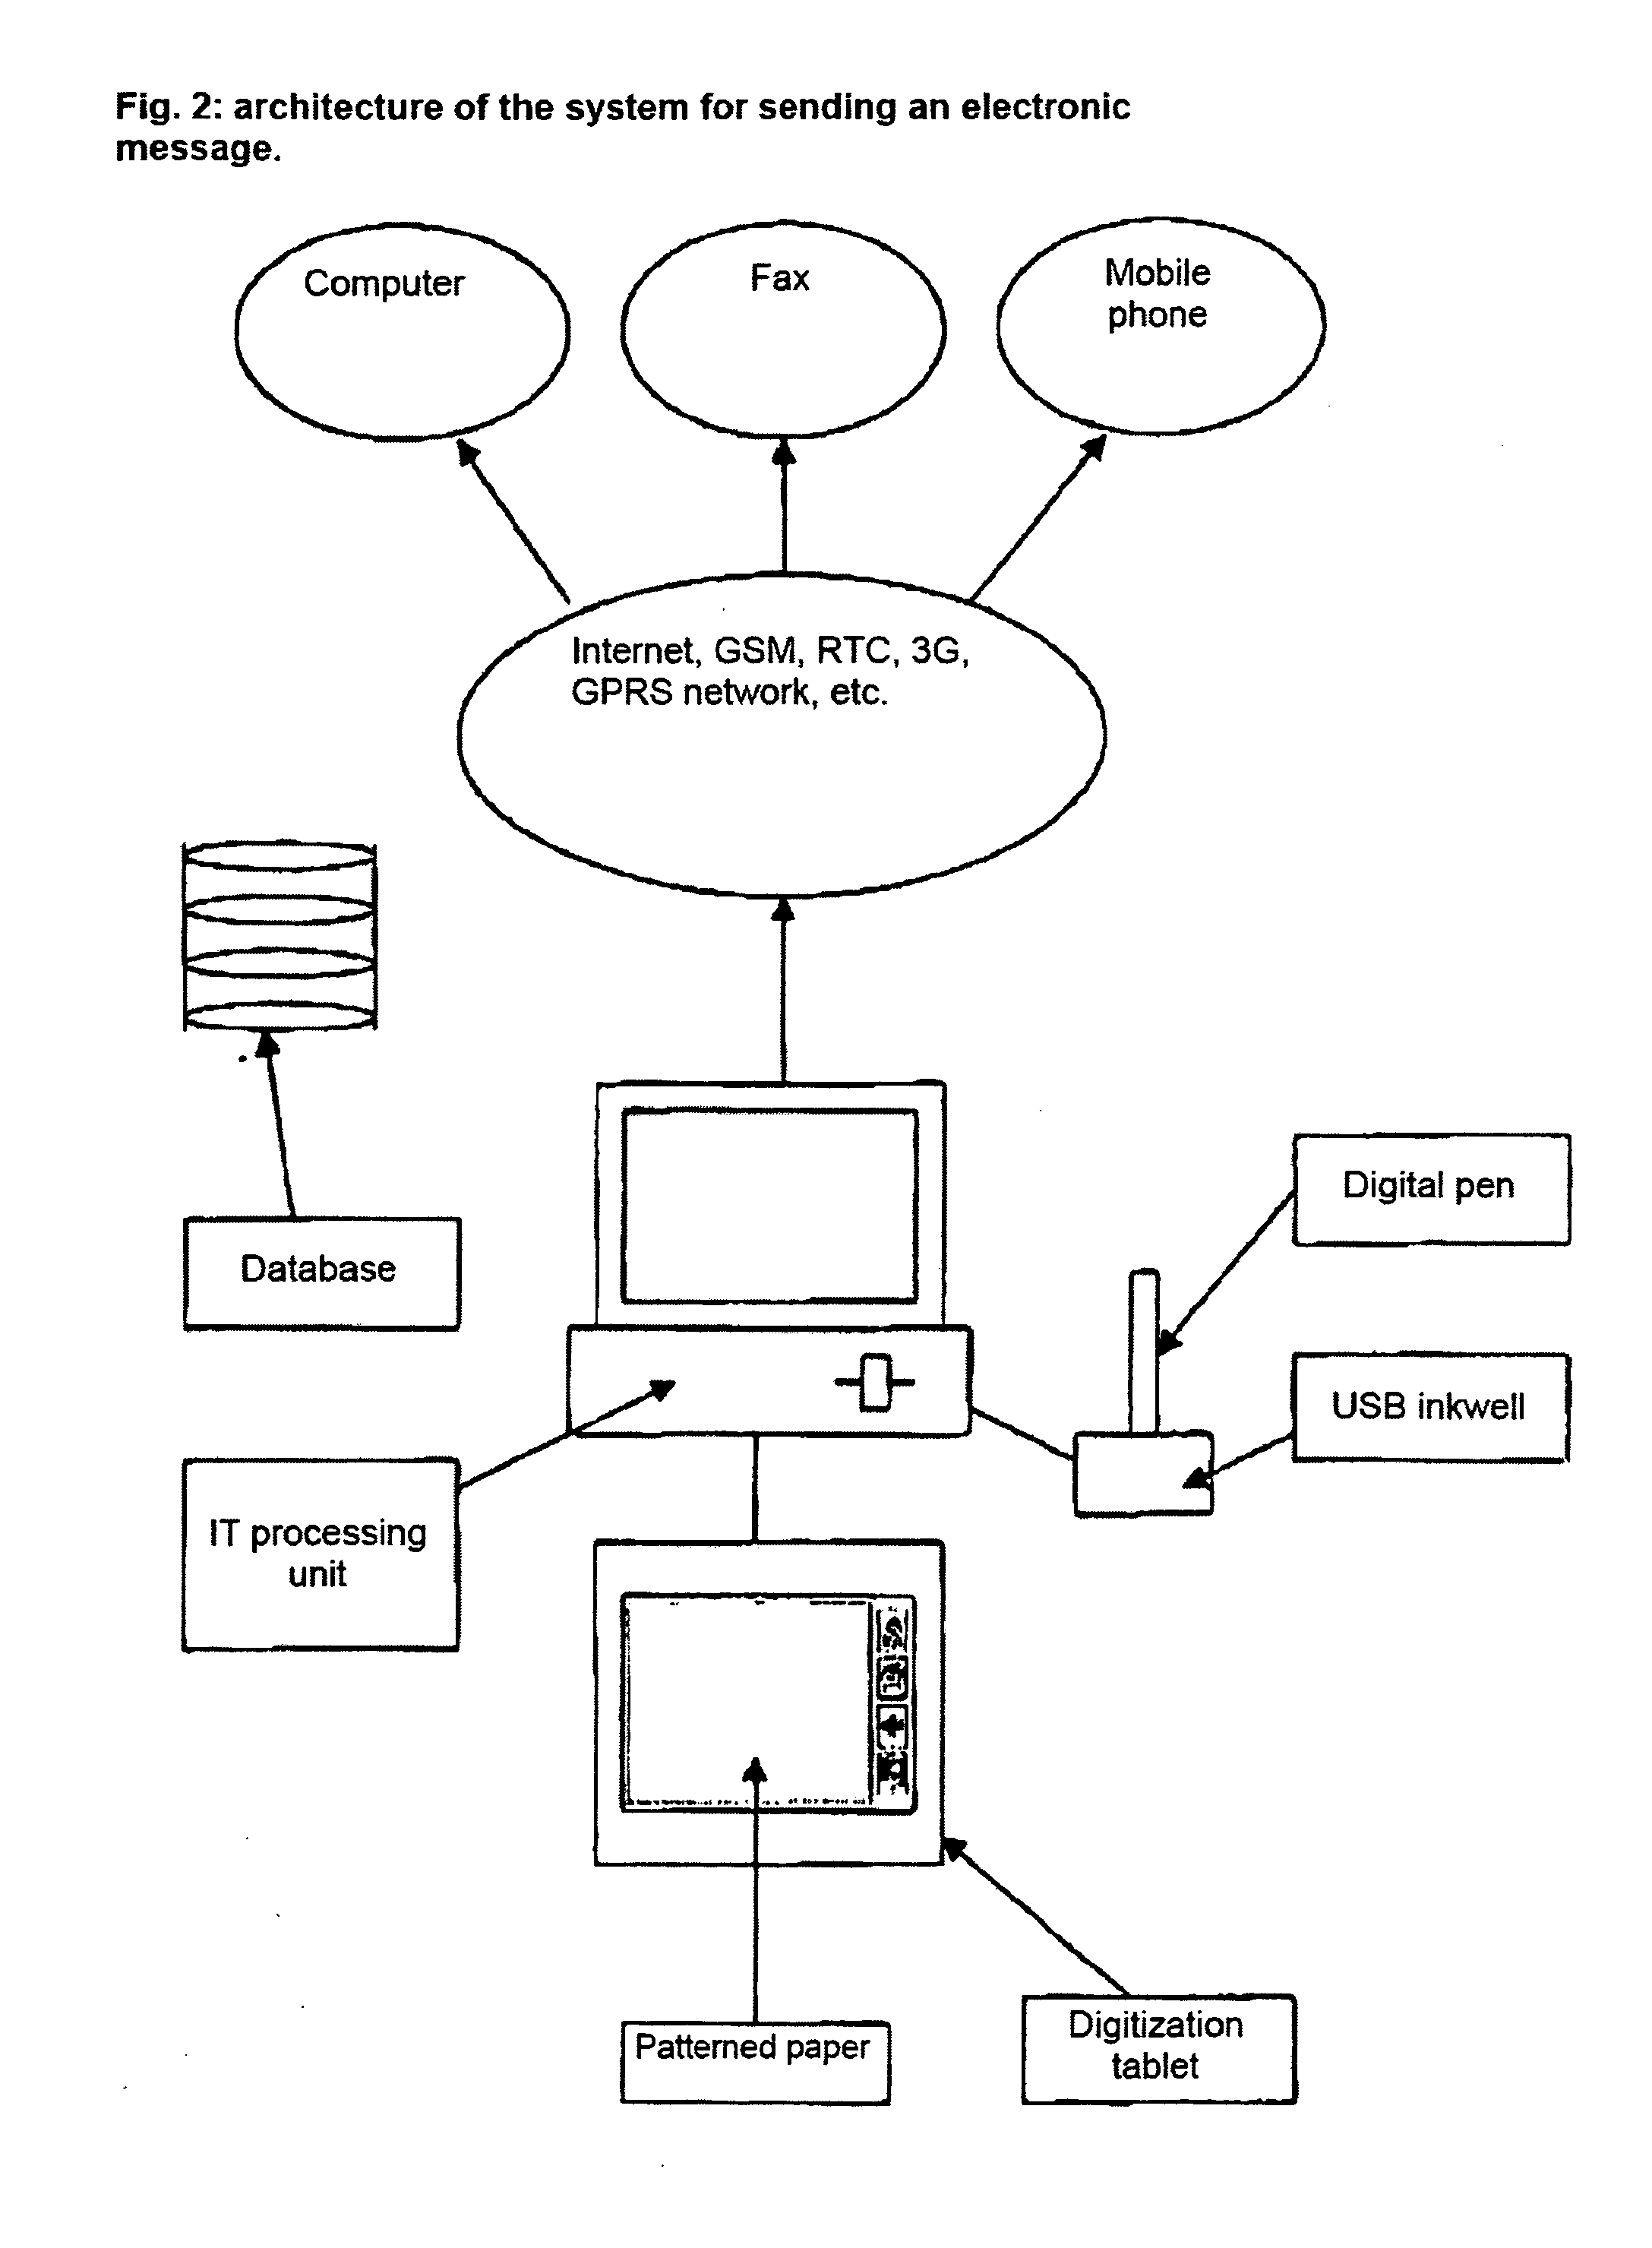 Method for generating and automatically sending a handwritten electronic message